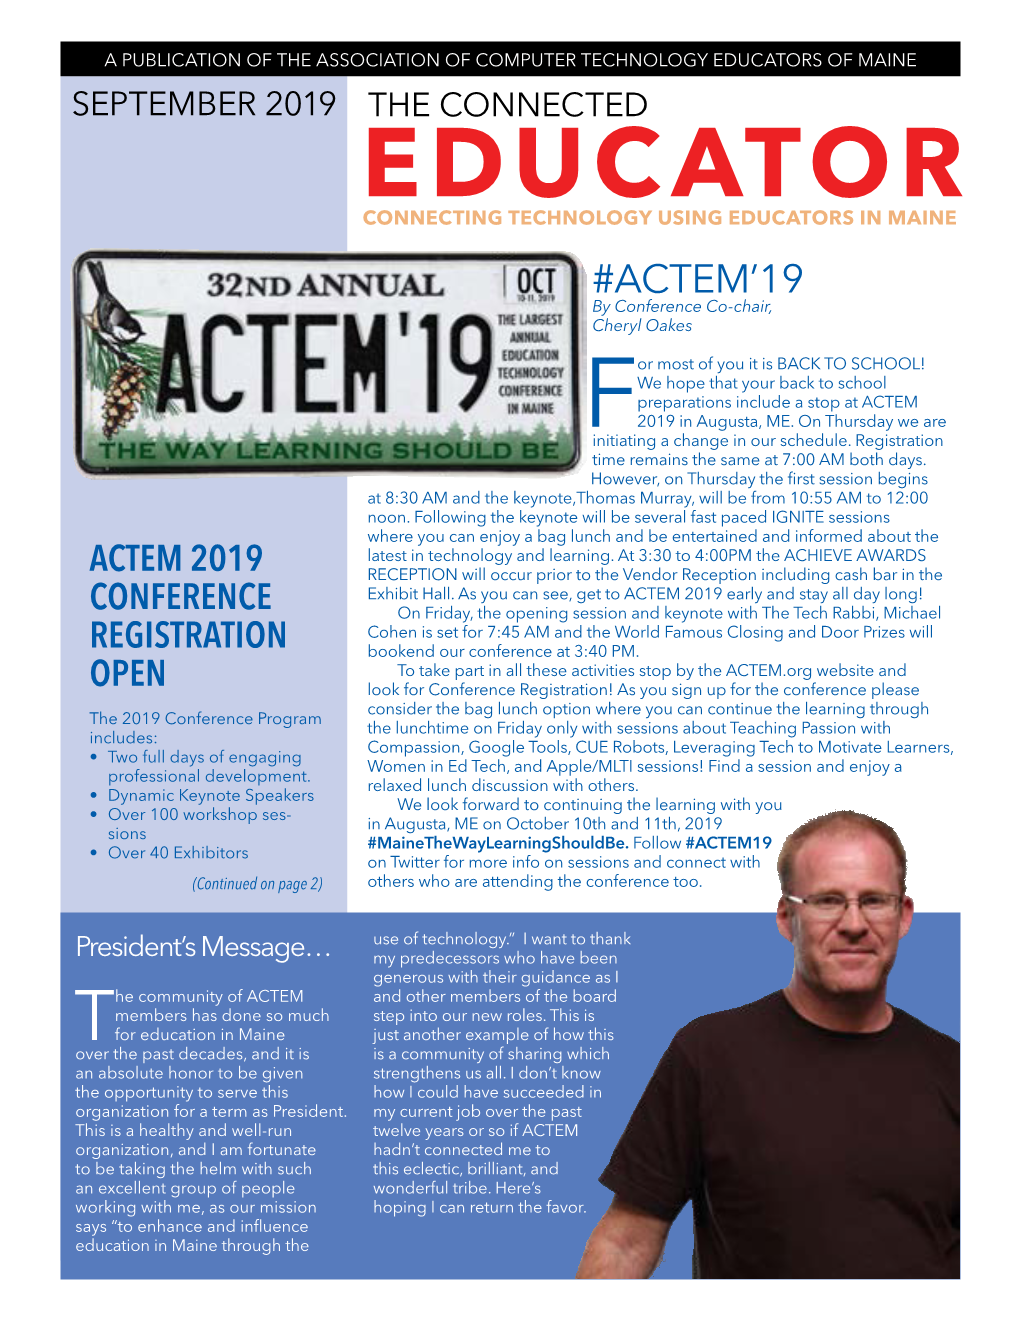 Educators of Maine September 2019 the Connected